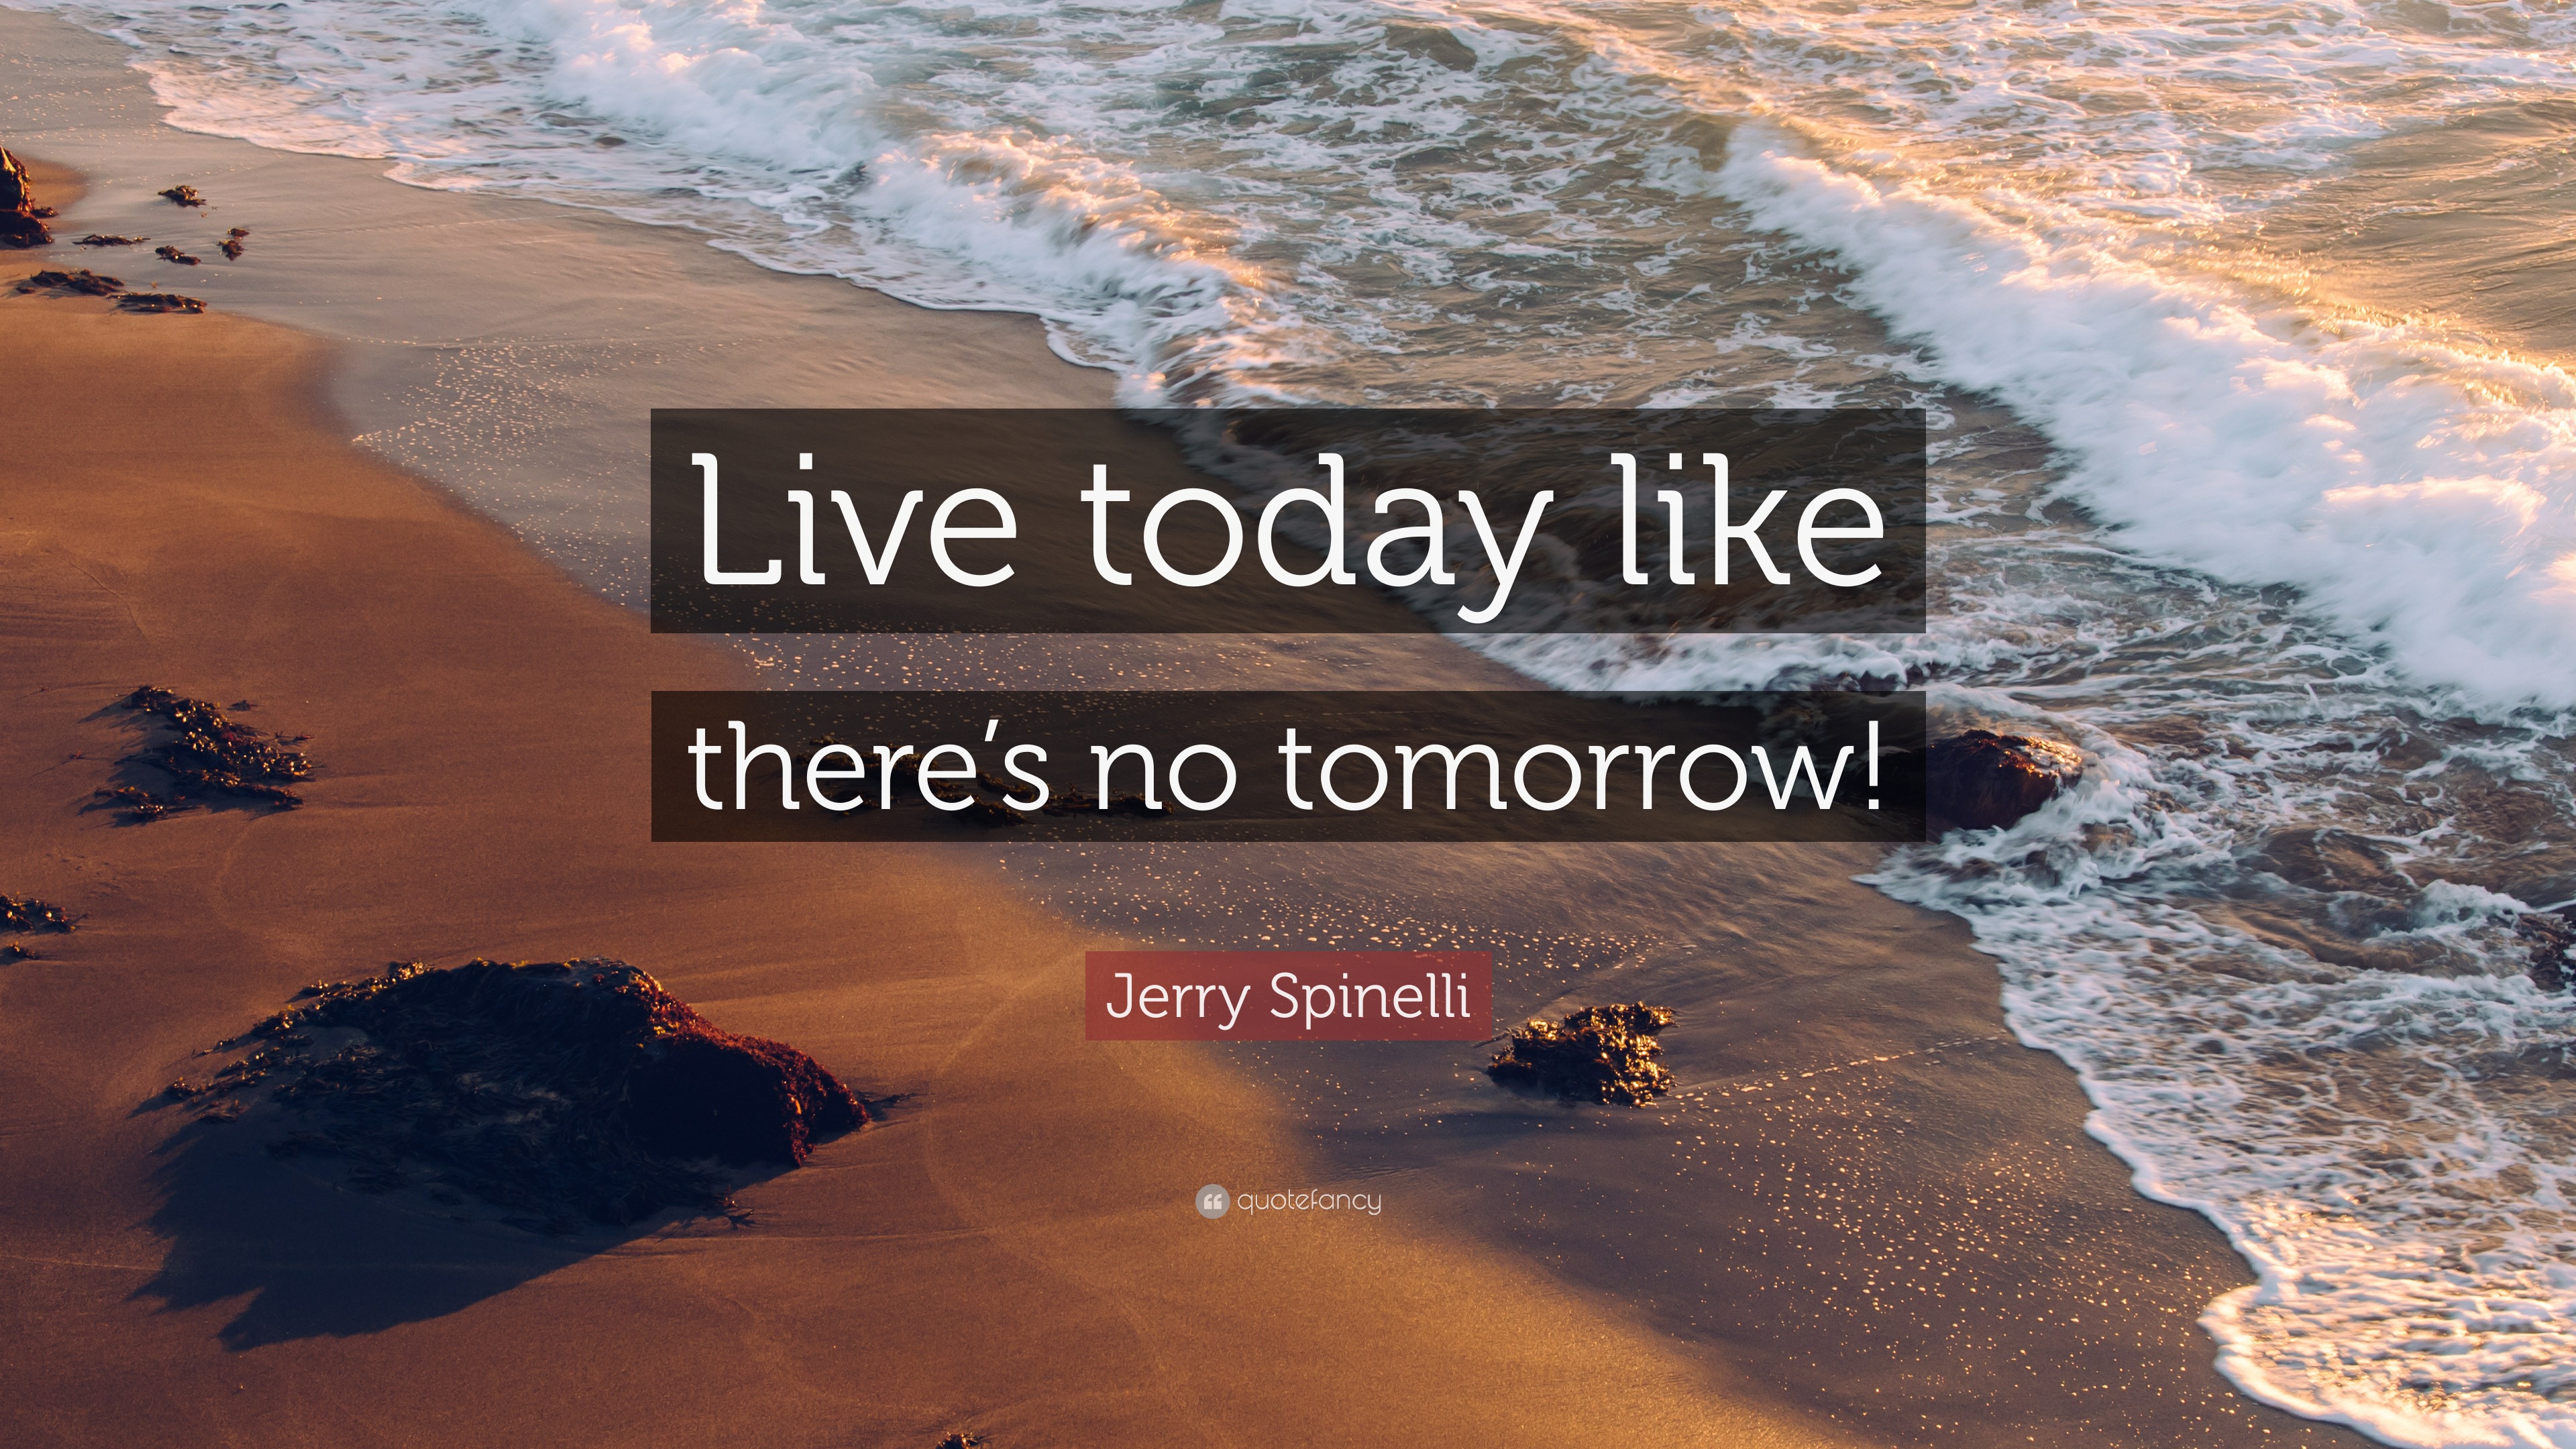 Jerry Spinelli Quote Live today like theres no tomorrow